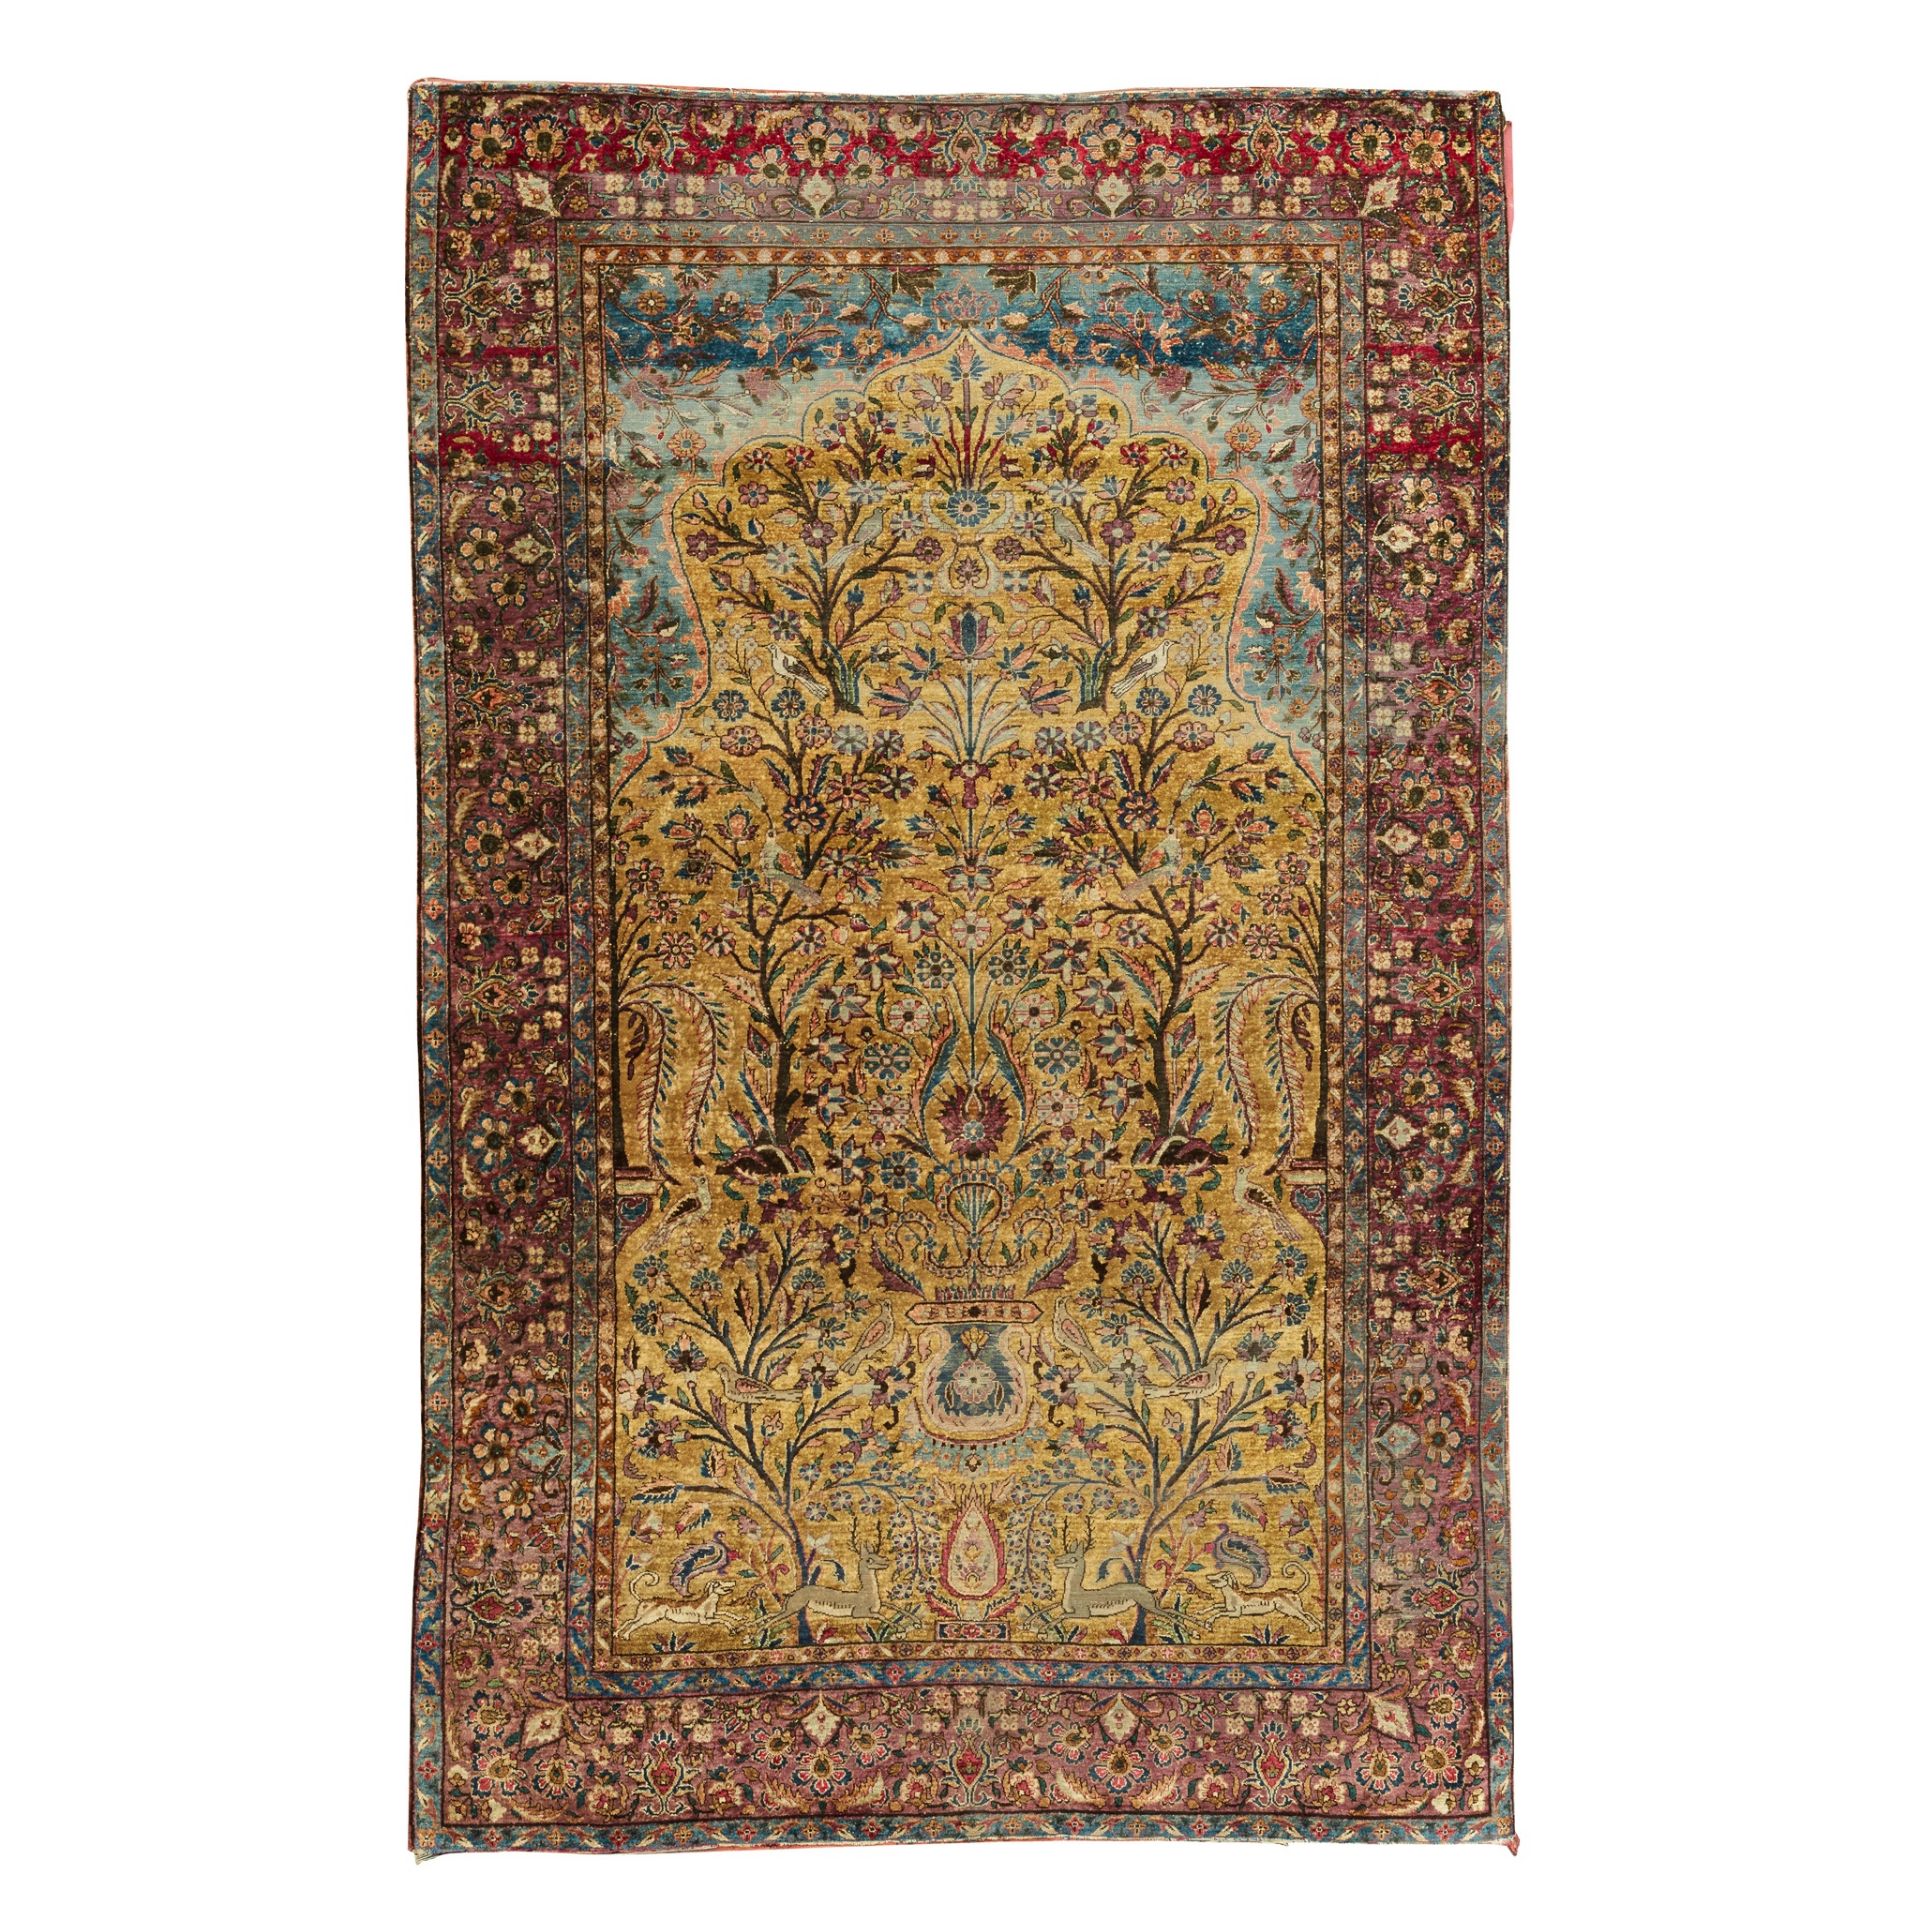 KASHAN SILK PRAYER RUG CENTRAL PERSIA, LATE 19TH/EARLY 20TH CENTURY